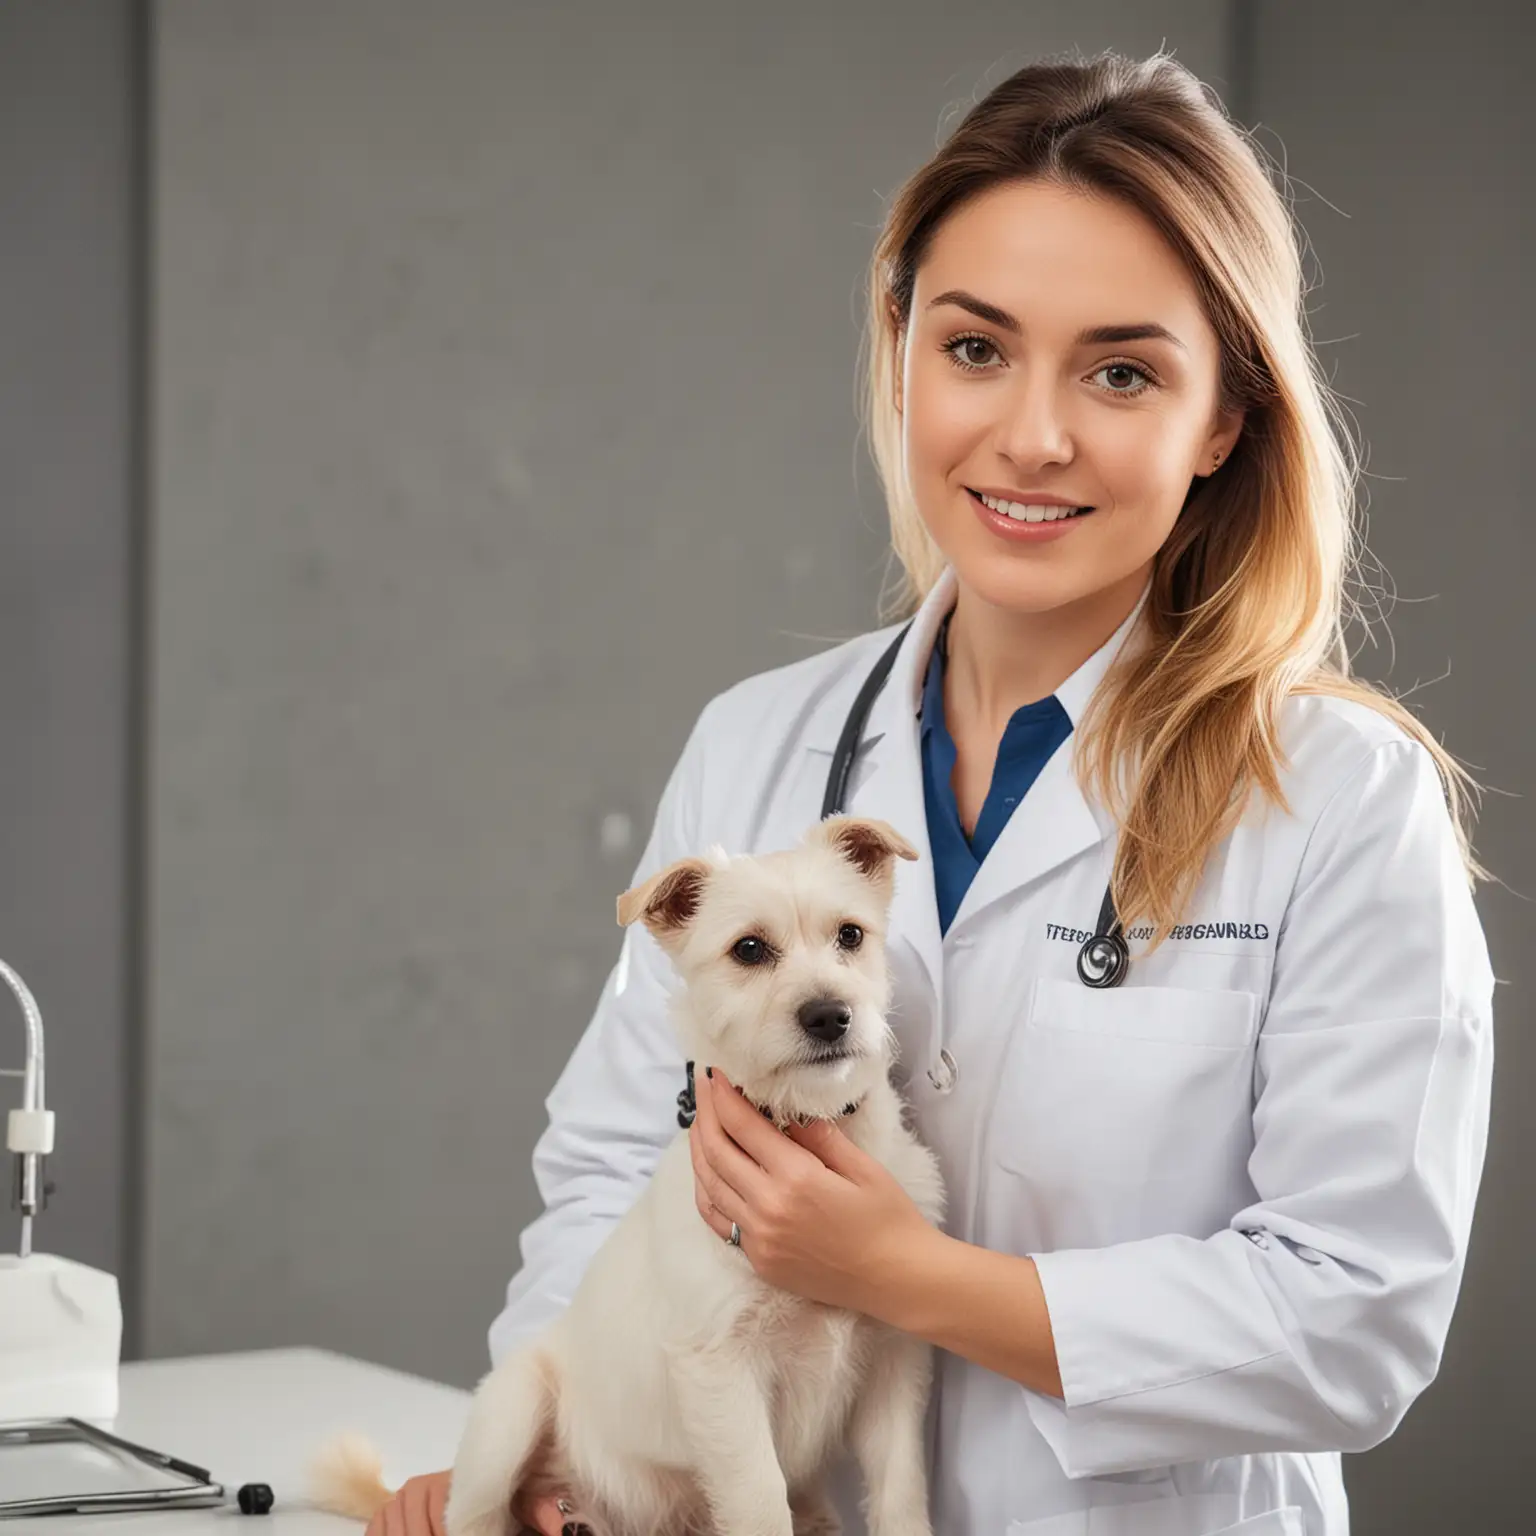 Woman Veterinarian in White Coat Examining a Patient